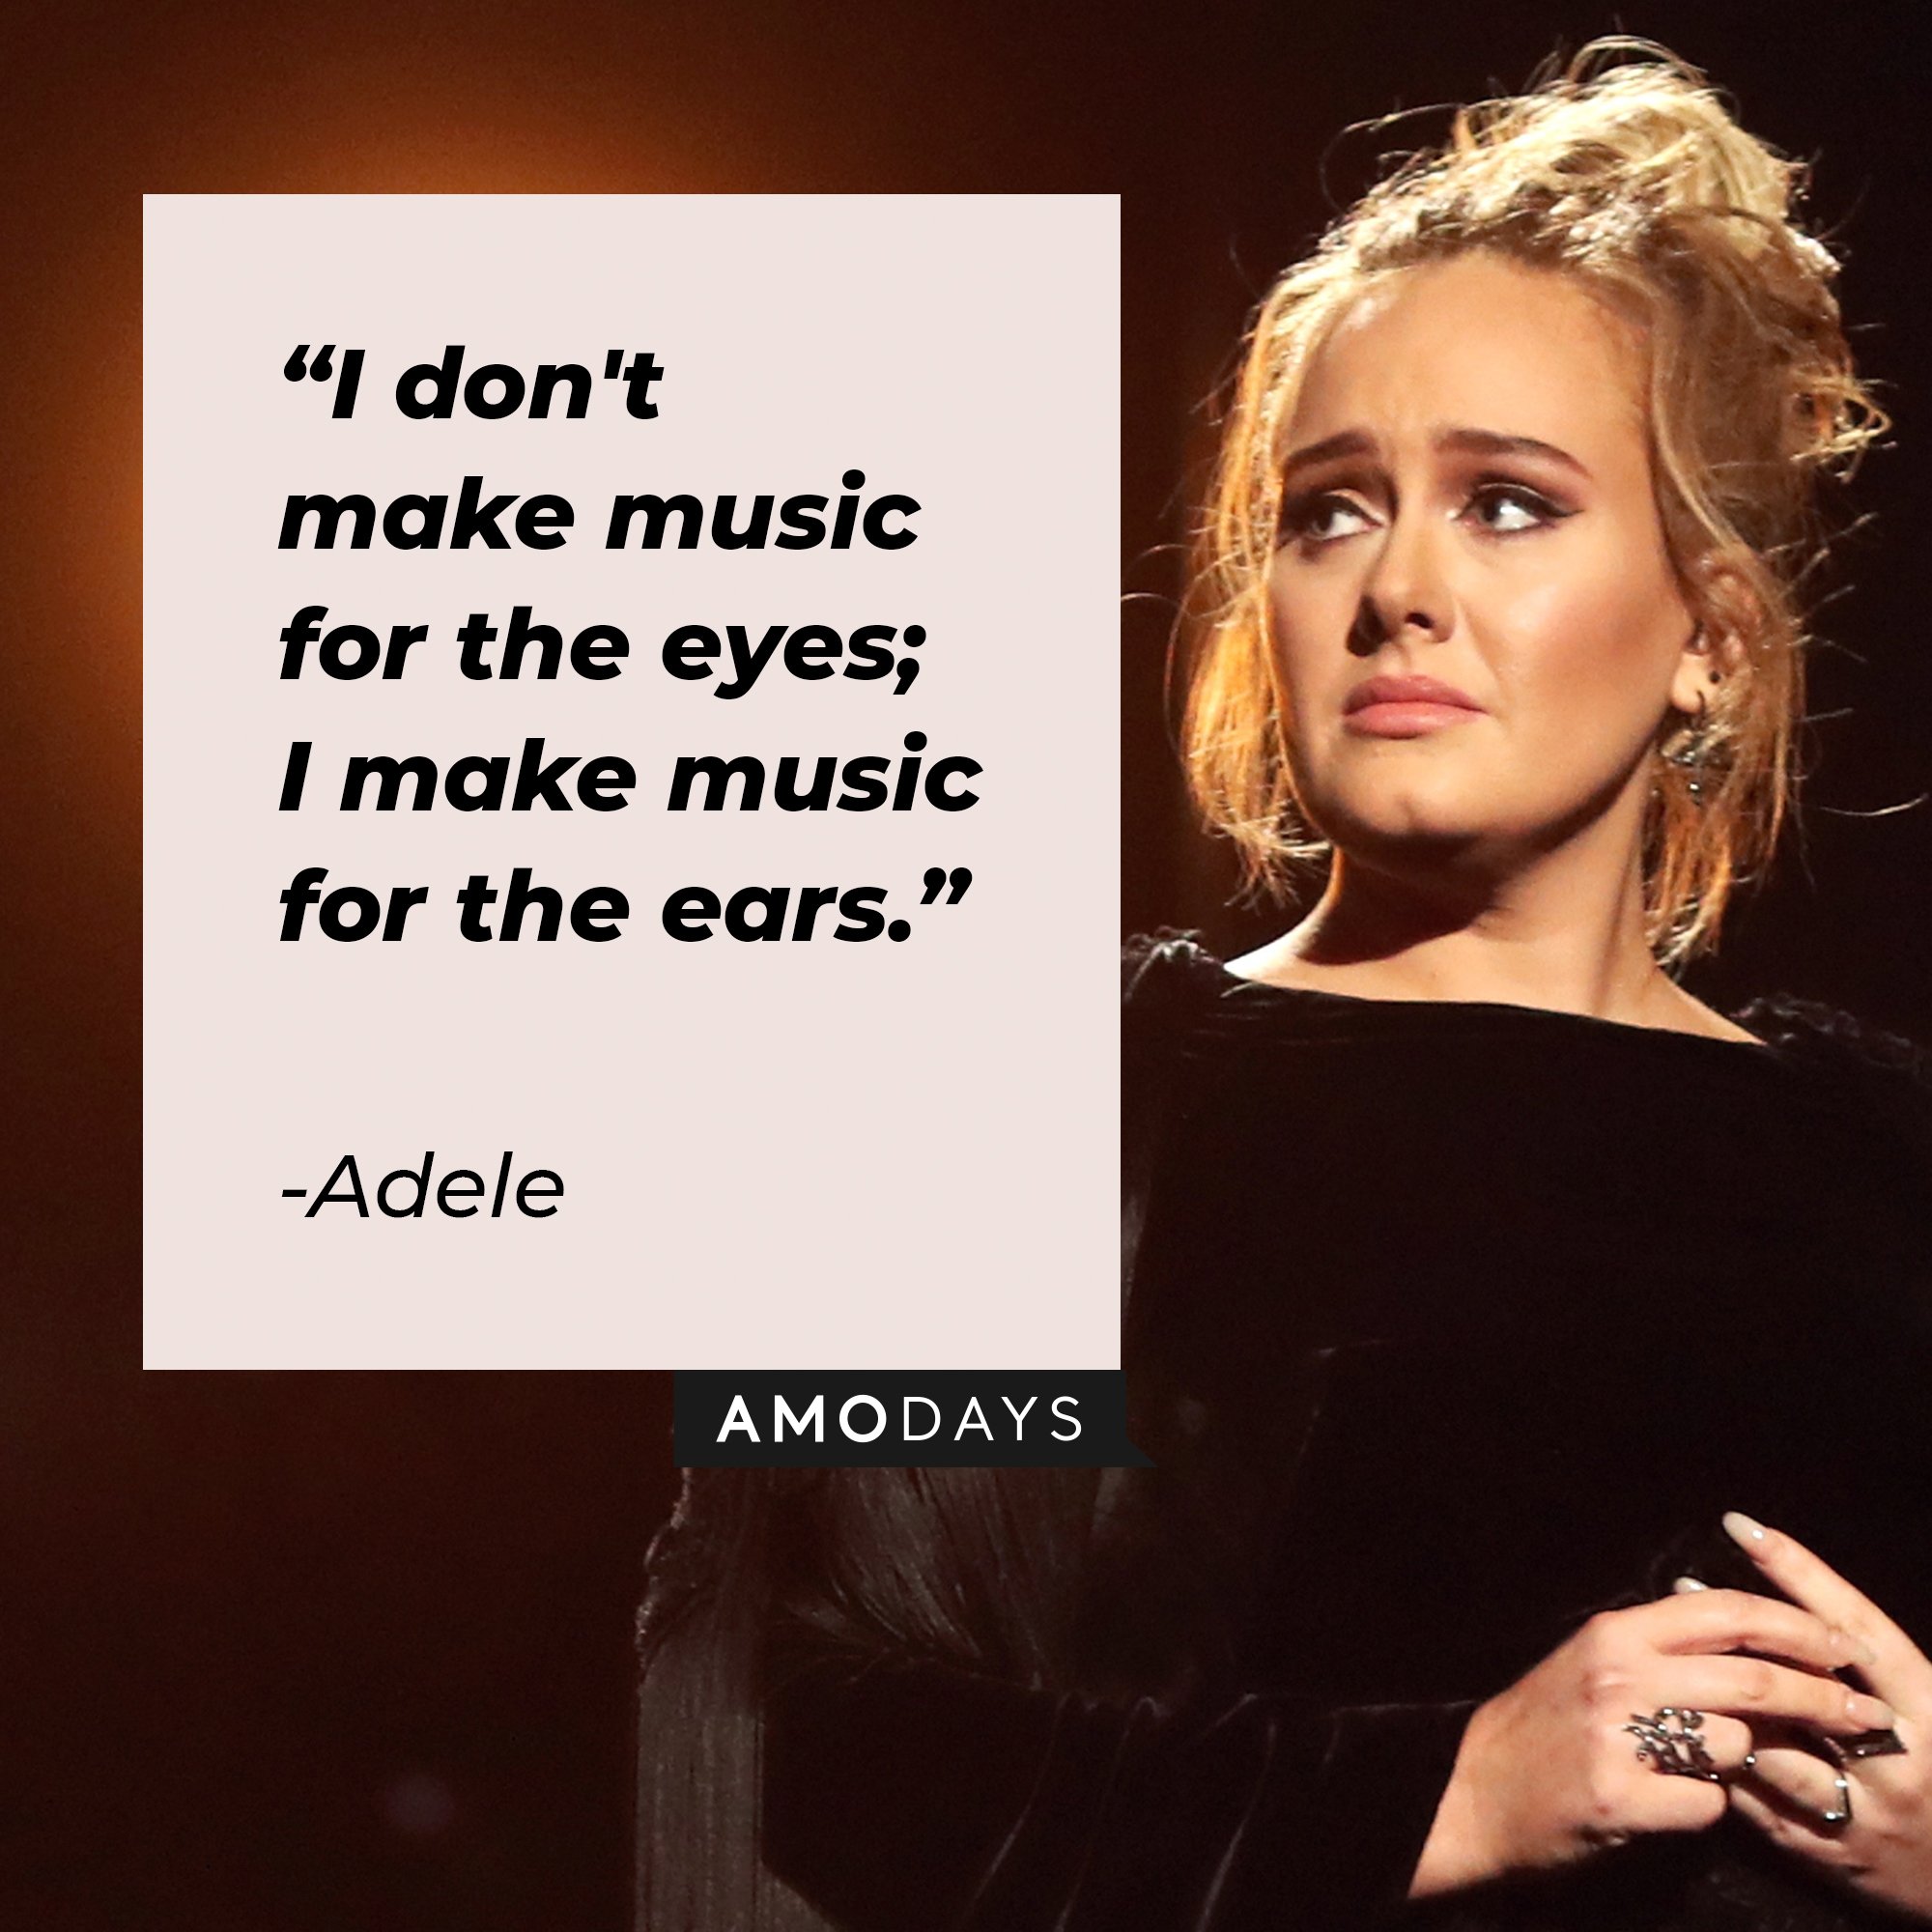 Adele’s quote: "I don't make music for the eyes. I make music for the ears." | Image: AmoDays